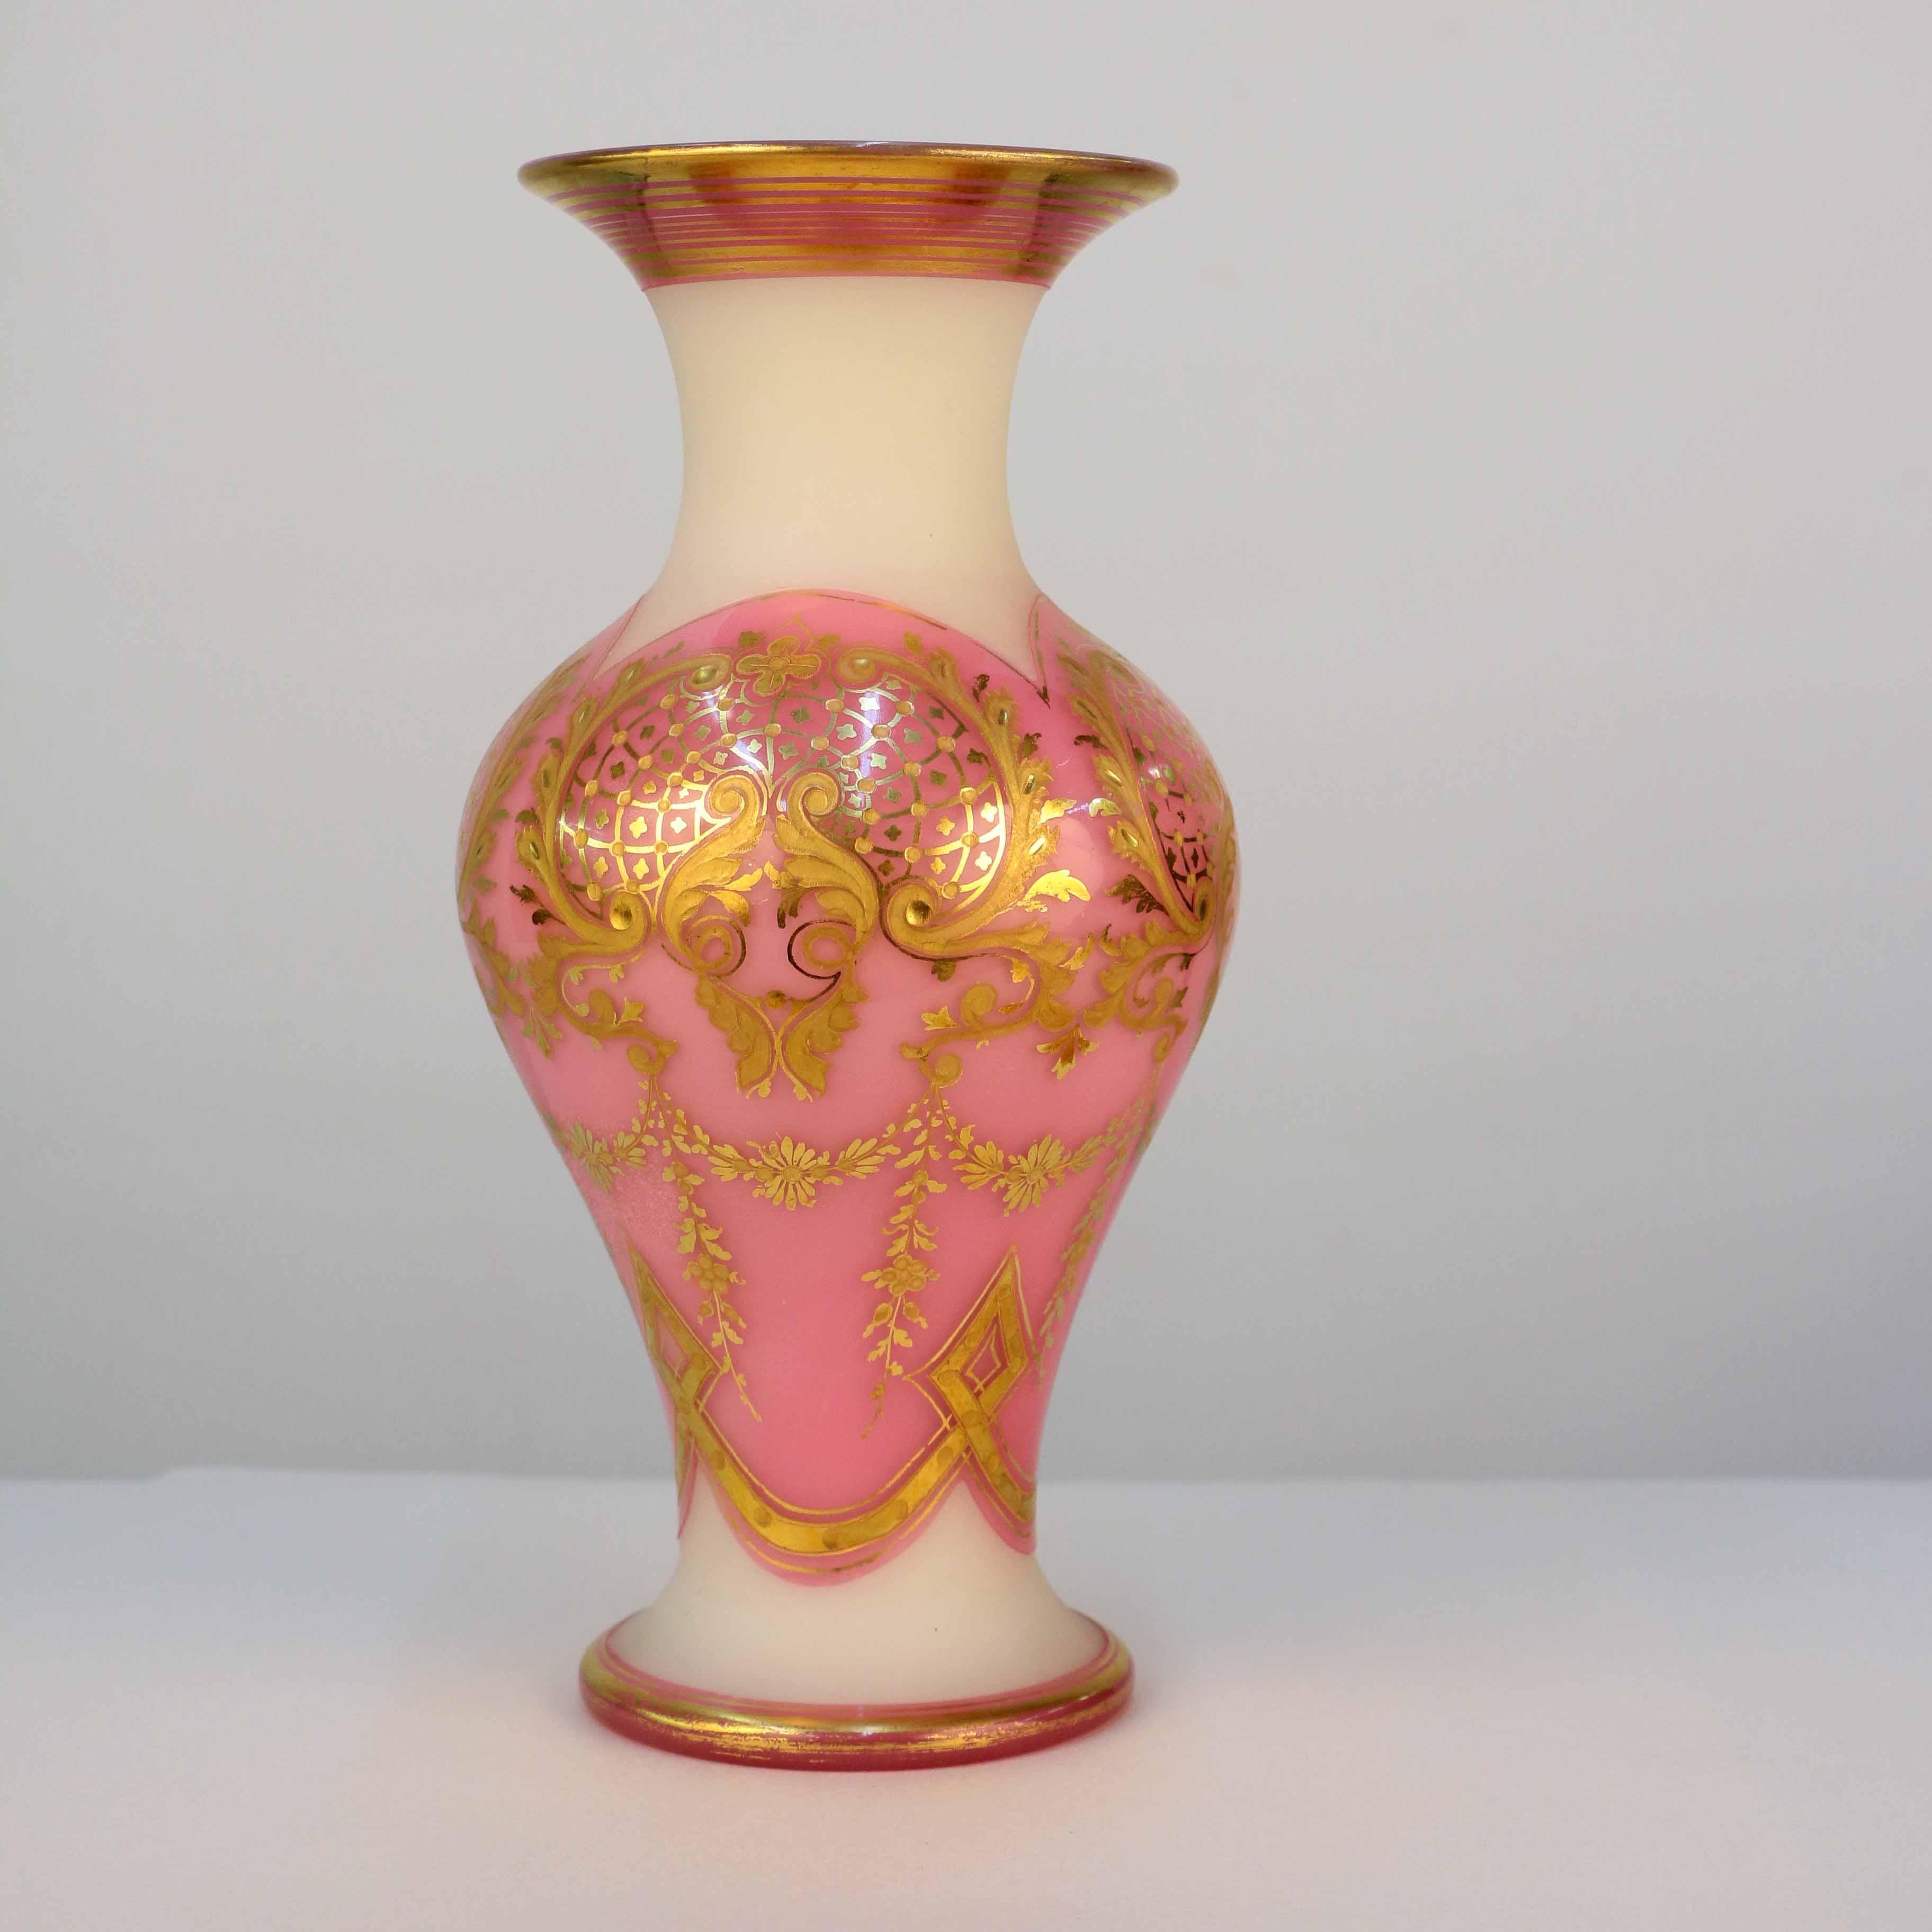 19th Century Baccarat White Opaline Glass Vase Pink Overlaid and Gilt